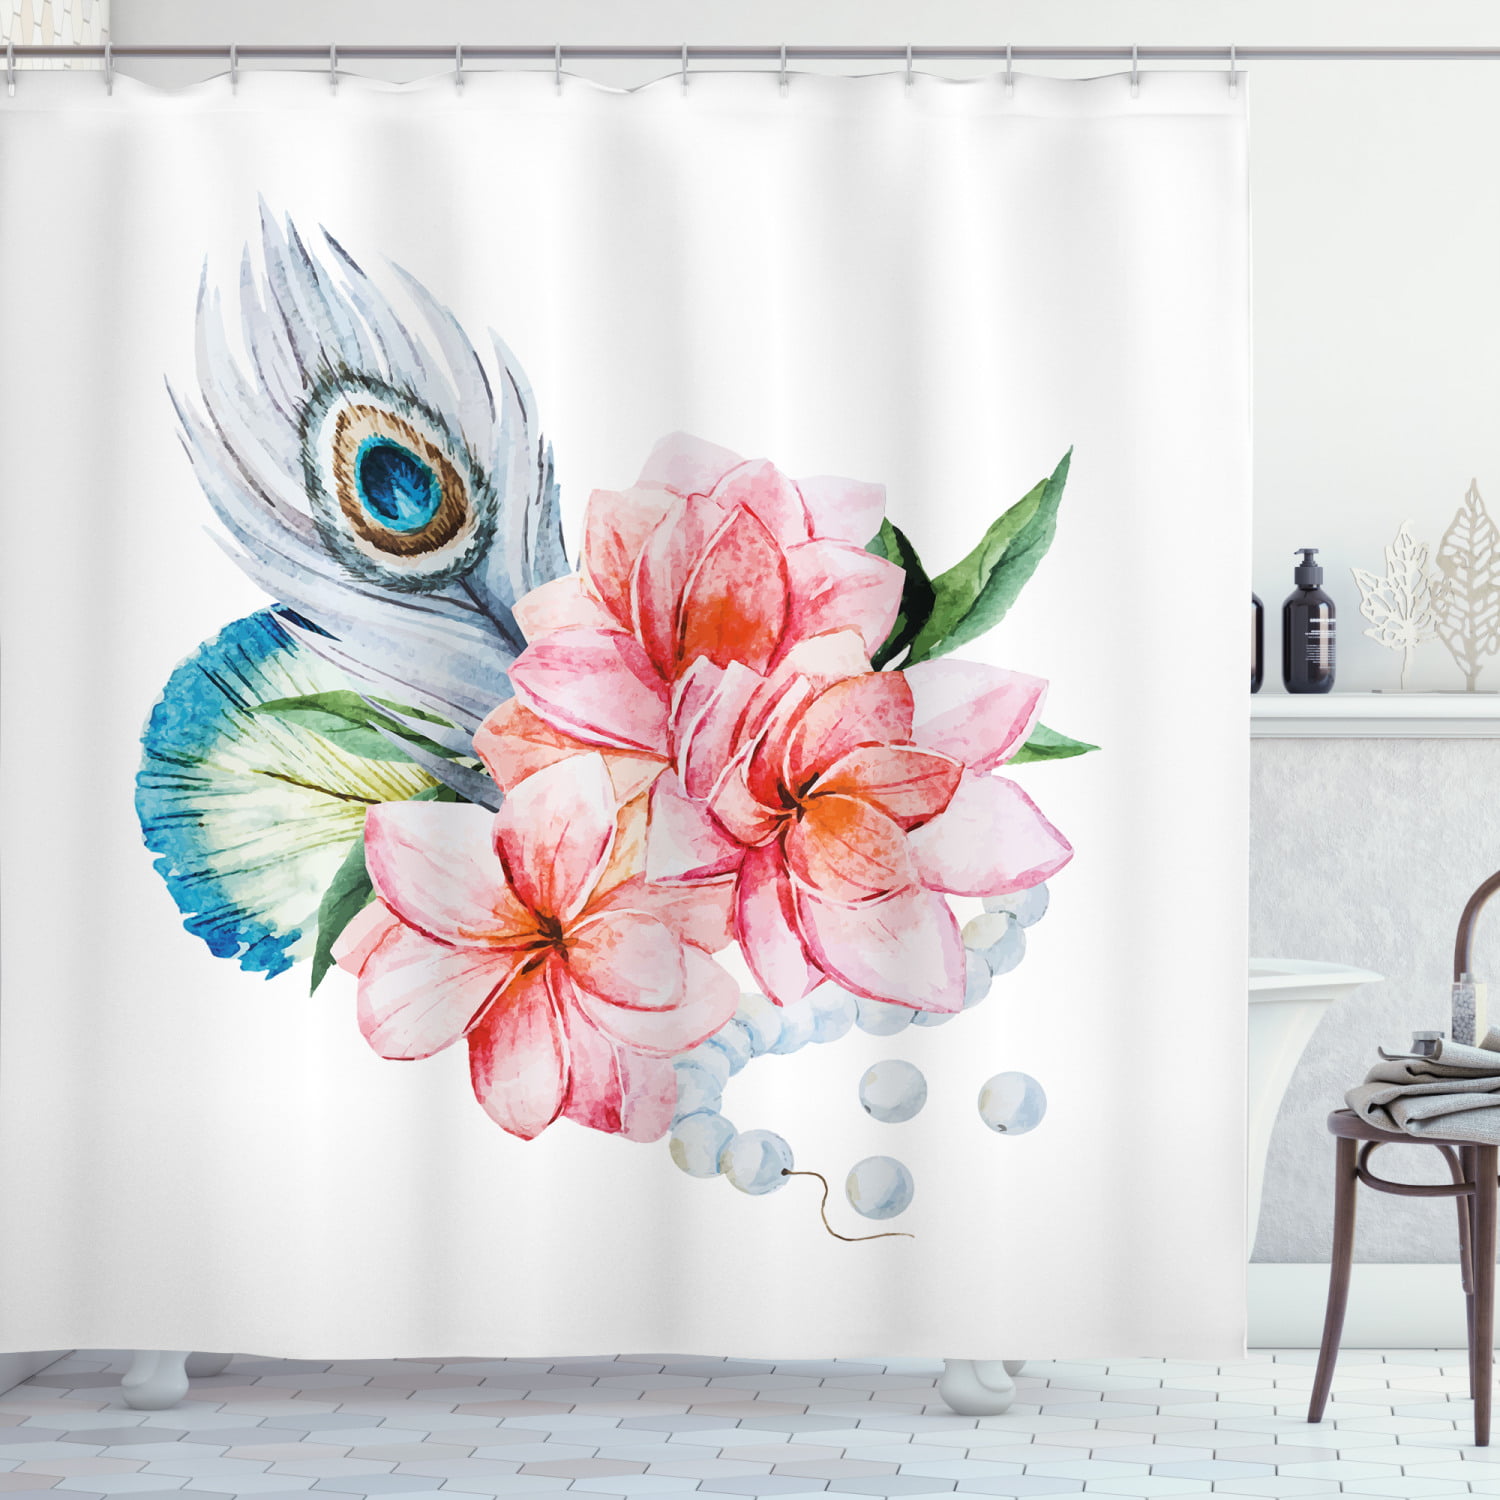 Waterproof Fabric Shower Curtain Liner Bath Accessory 72" Floral Peony Peacock- 